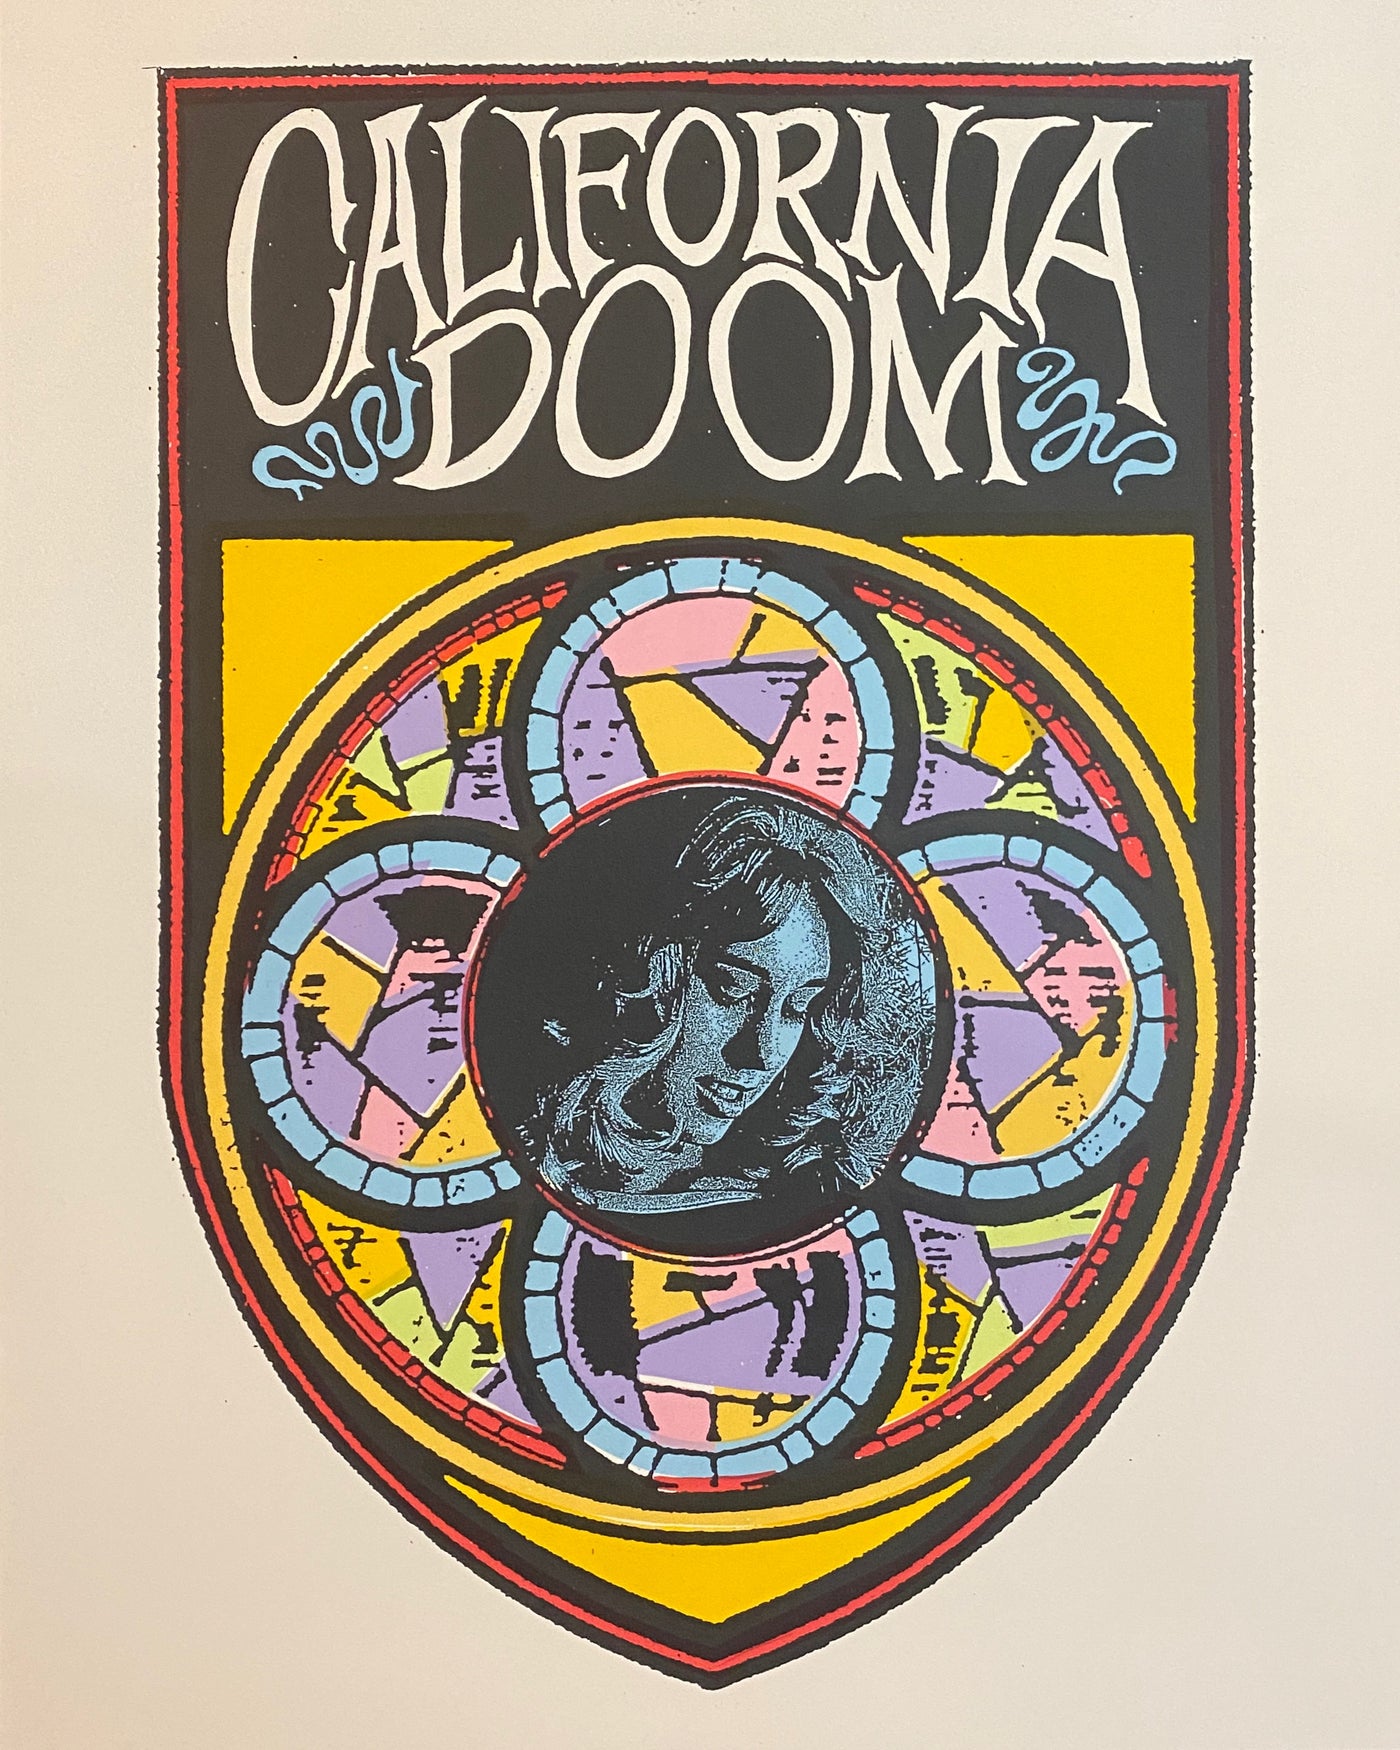 Stained Glass California Doom Poster